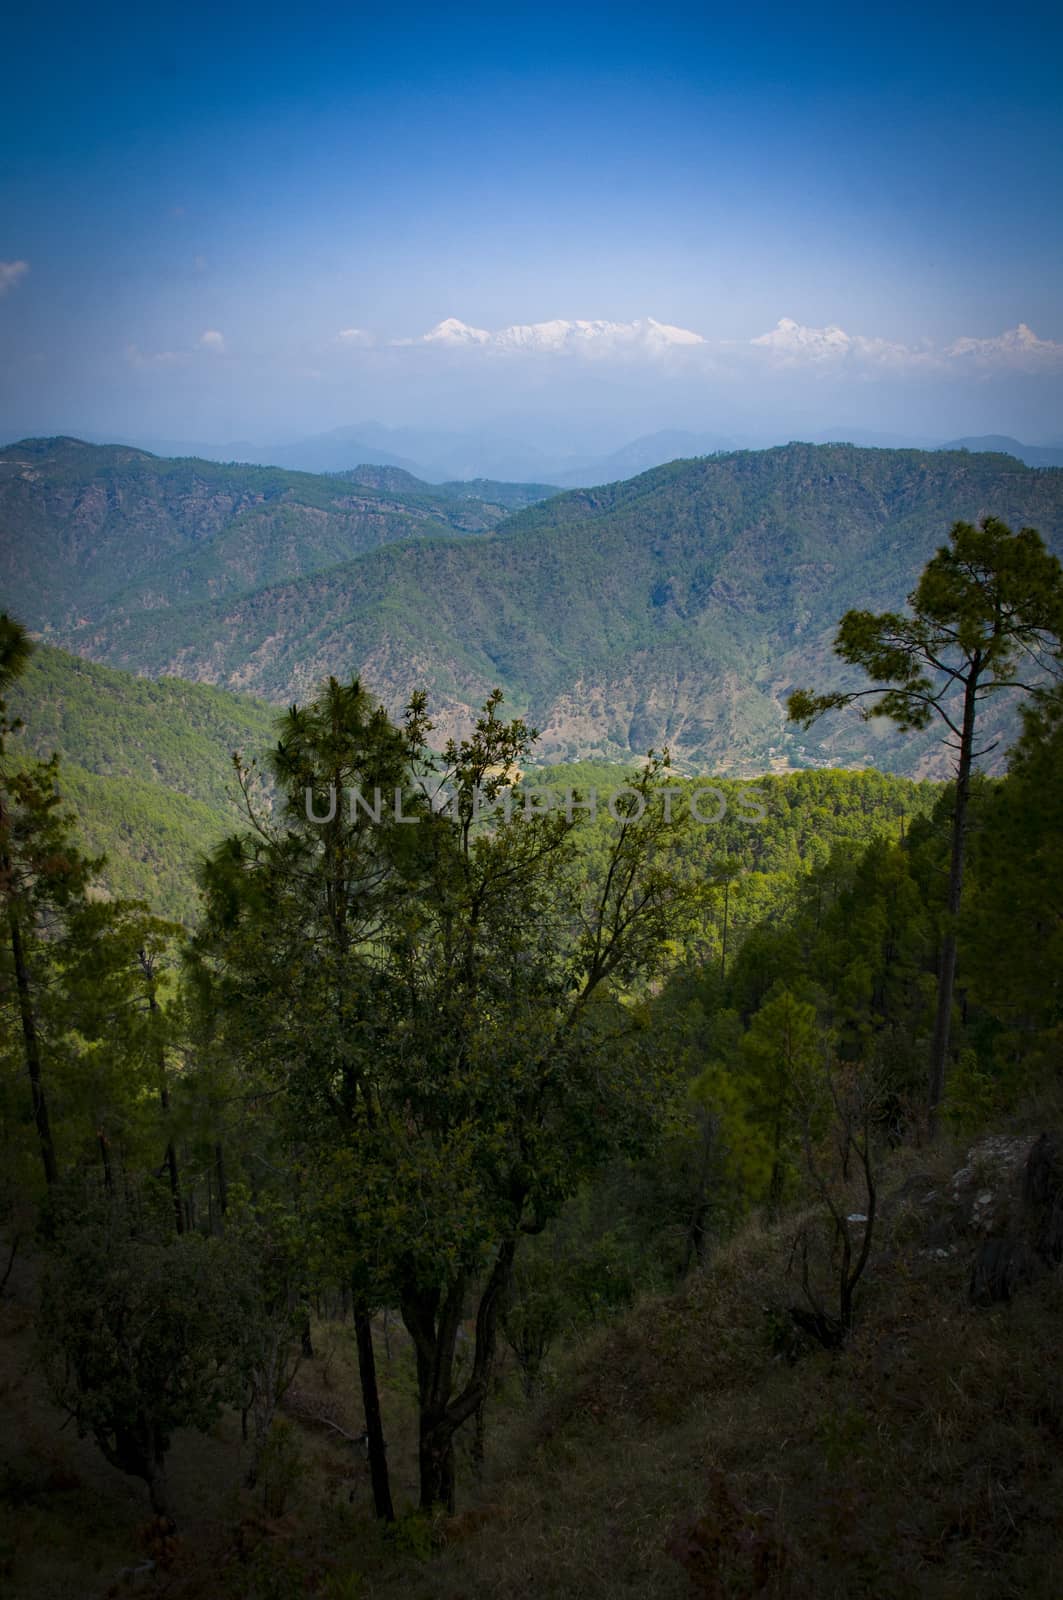 Light on a mountain in Almora, India